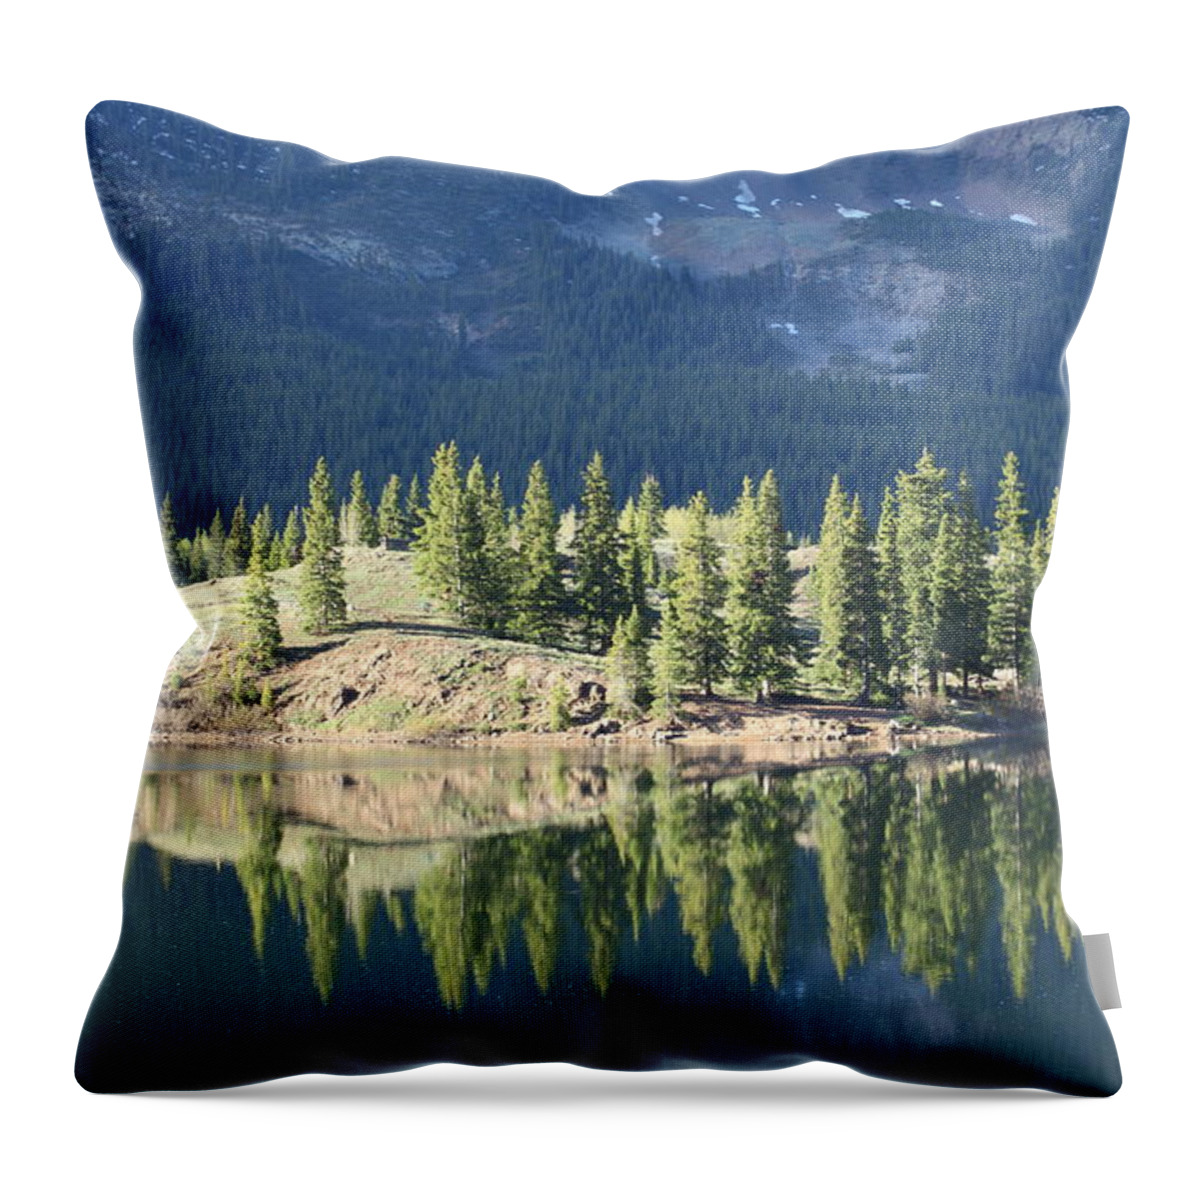 Colorado Throw Pillow featuring the photograph Chiaroscuro by Eric Glaser